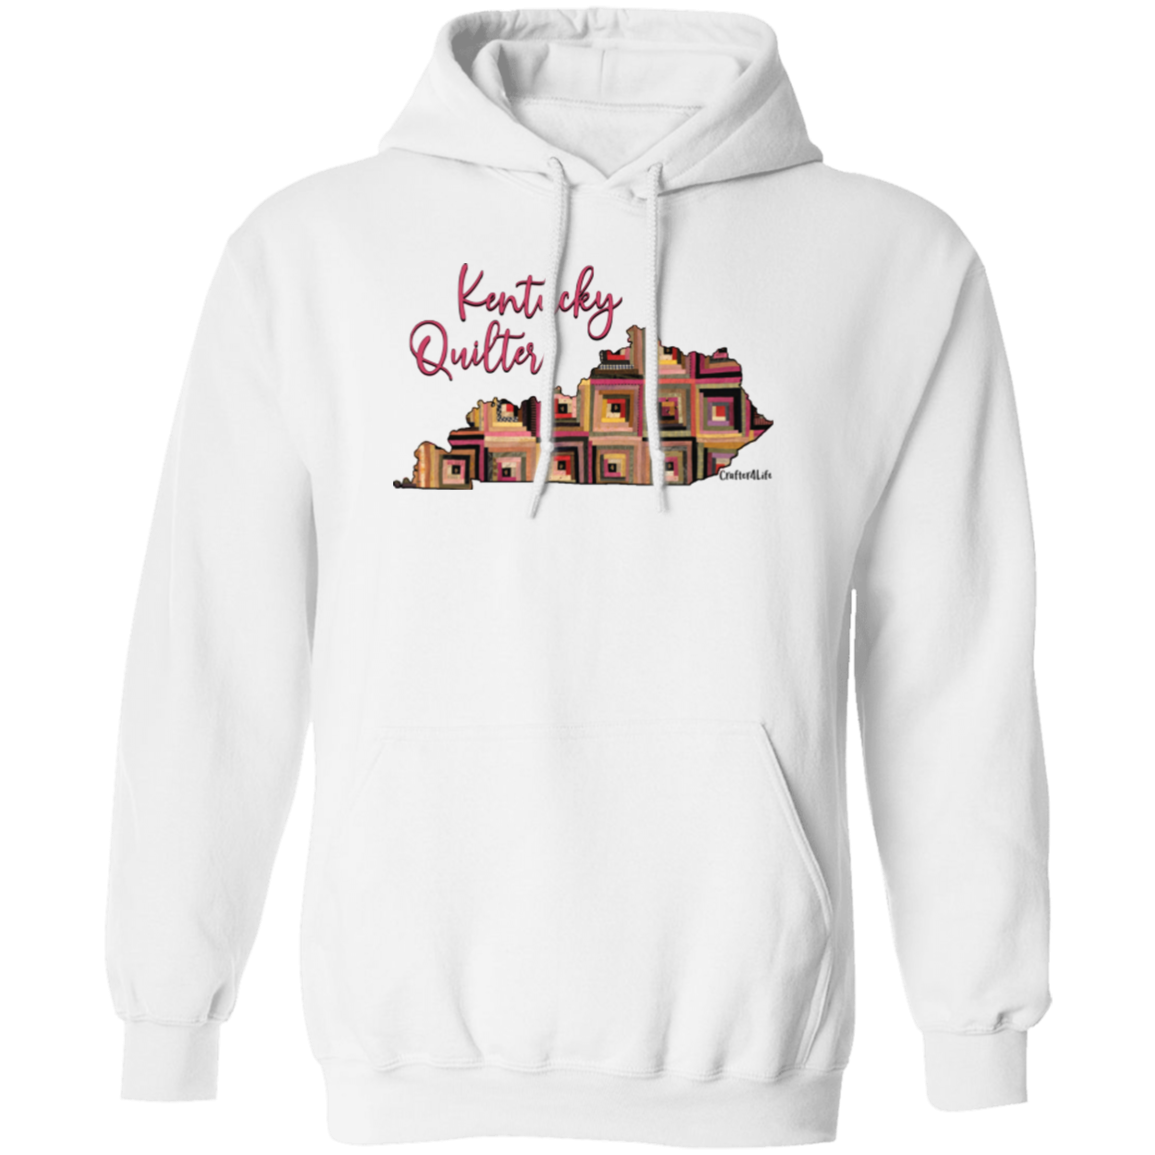 Kentucky Quilter Pullover Hoodie, Gift for Quilting Friends and Family